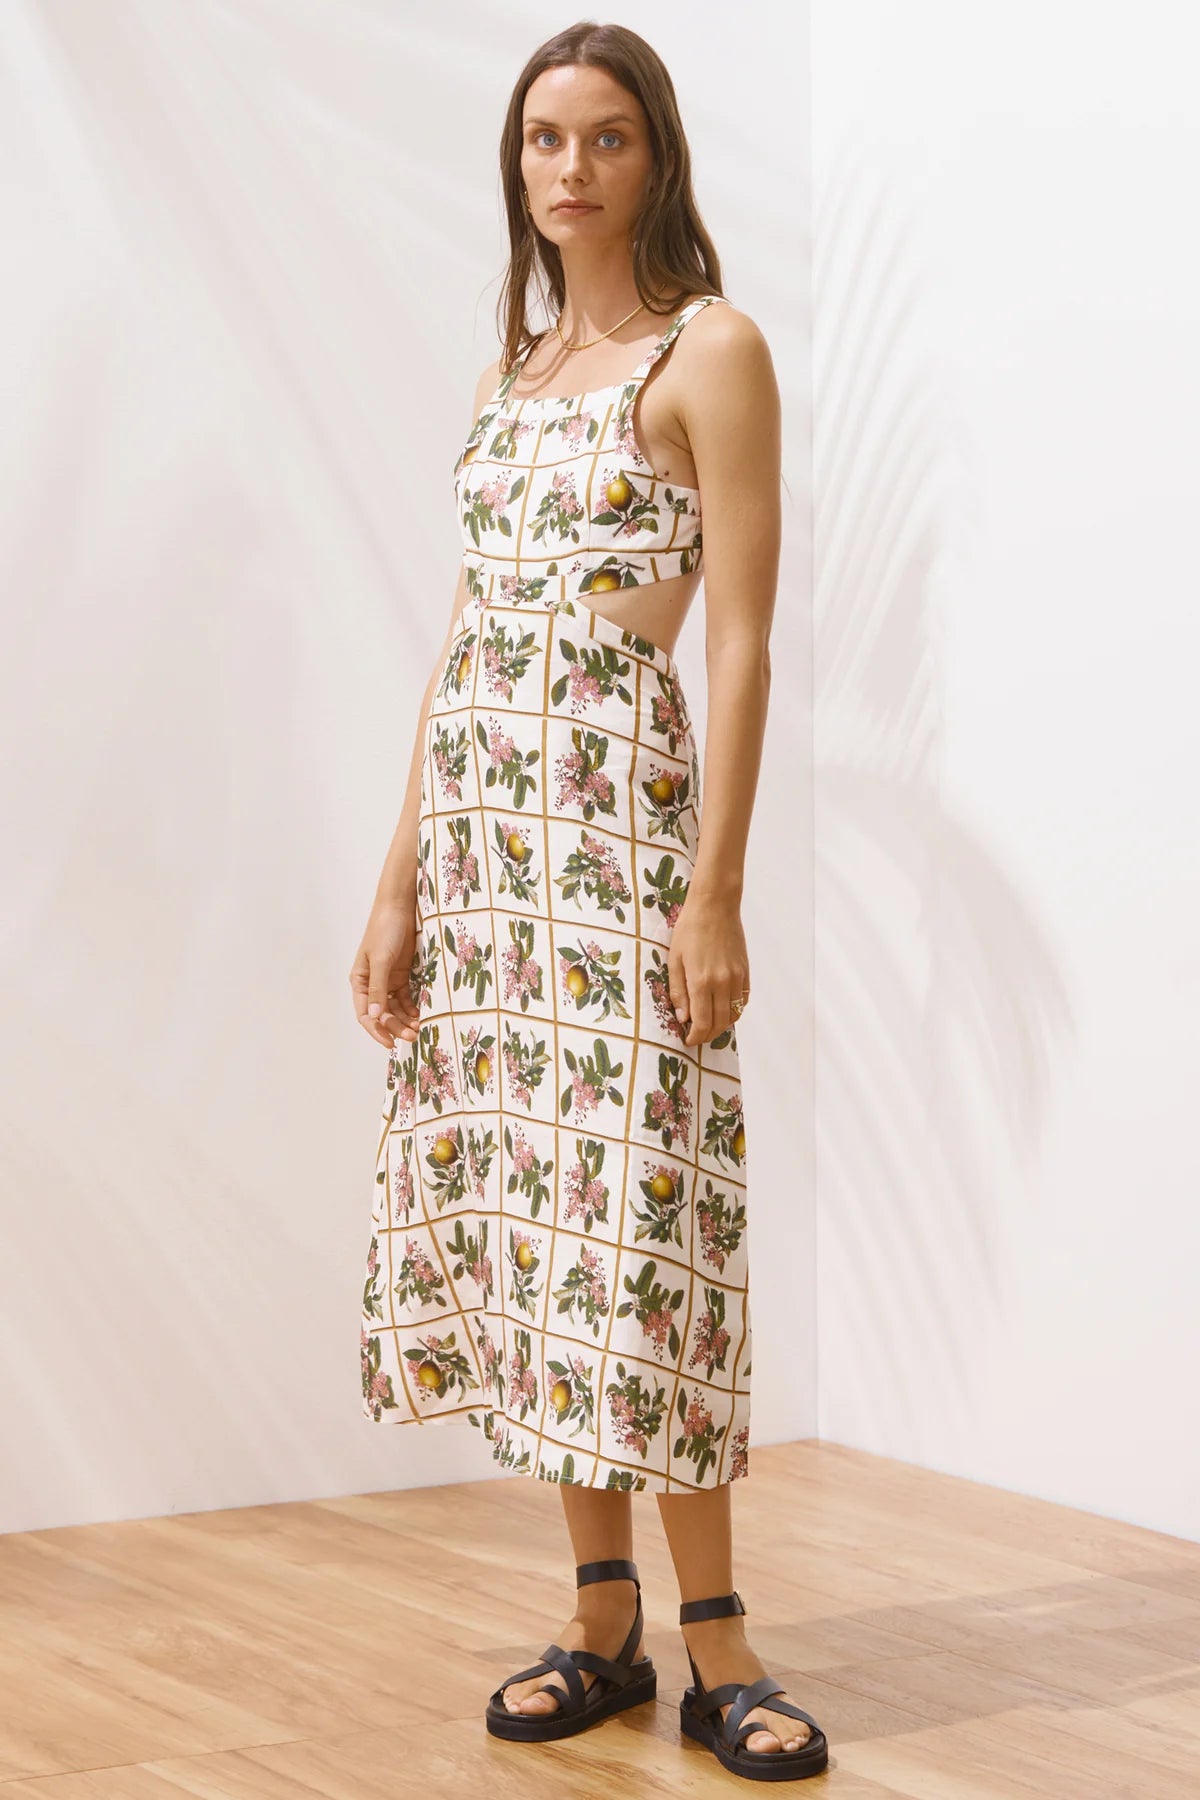 Sleeveless botanical inspired printed midi dress with side and back cut outs and square neckline